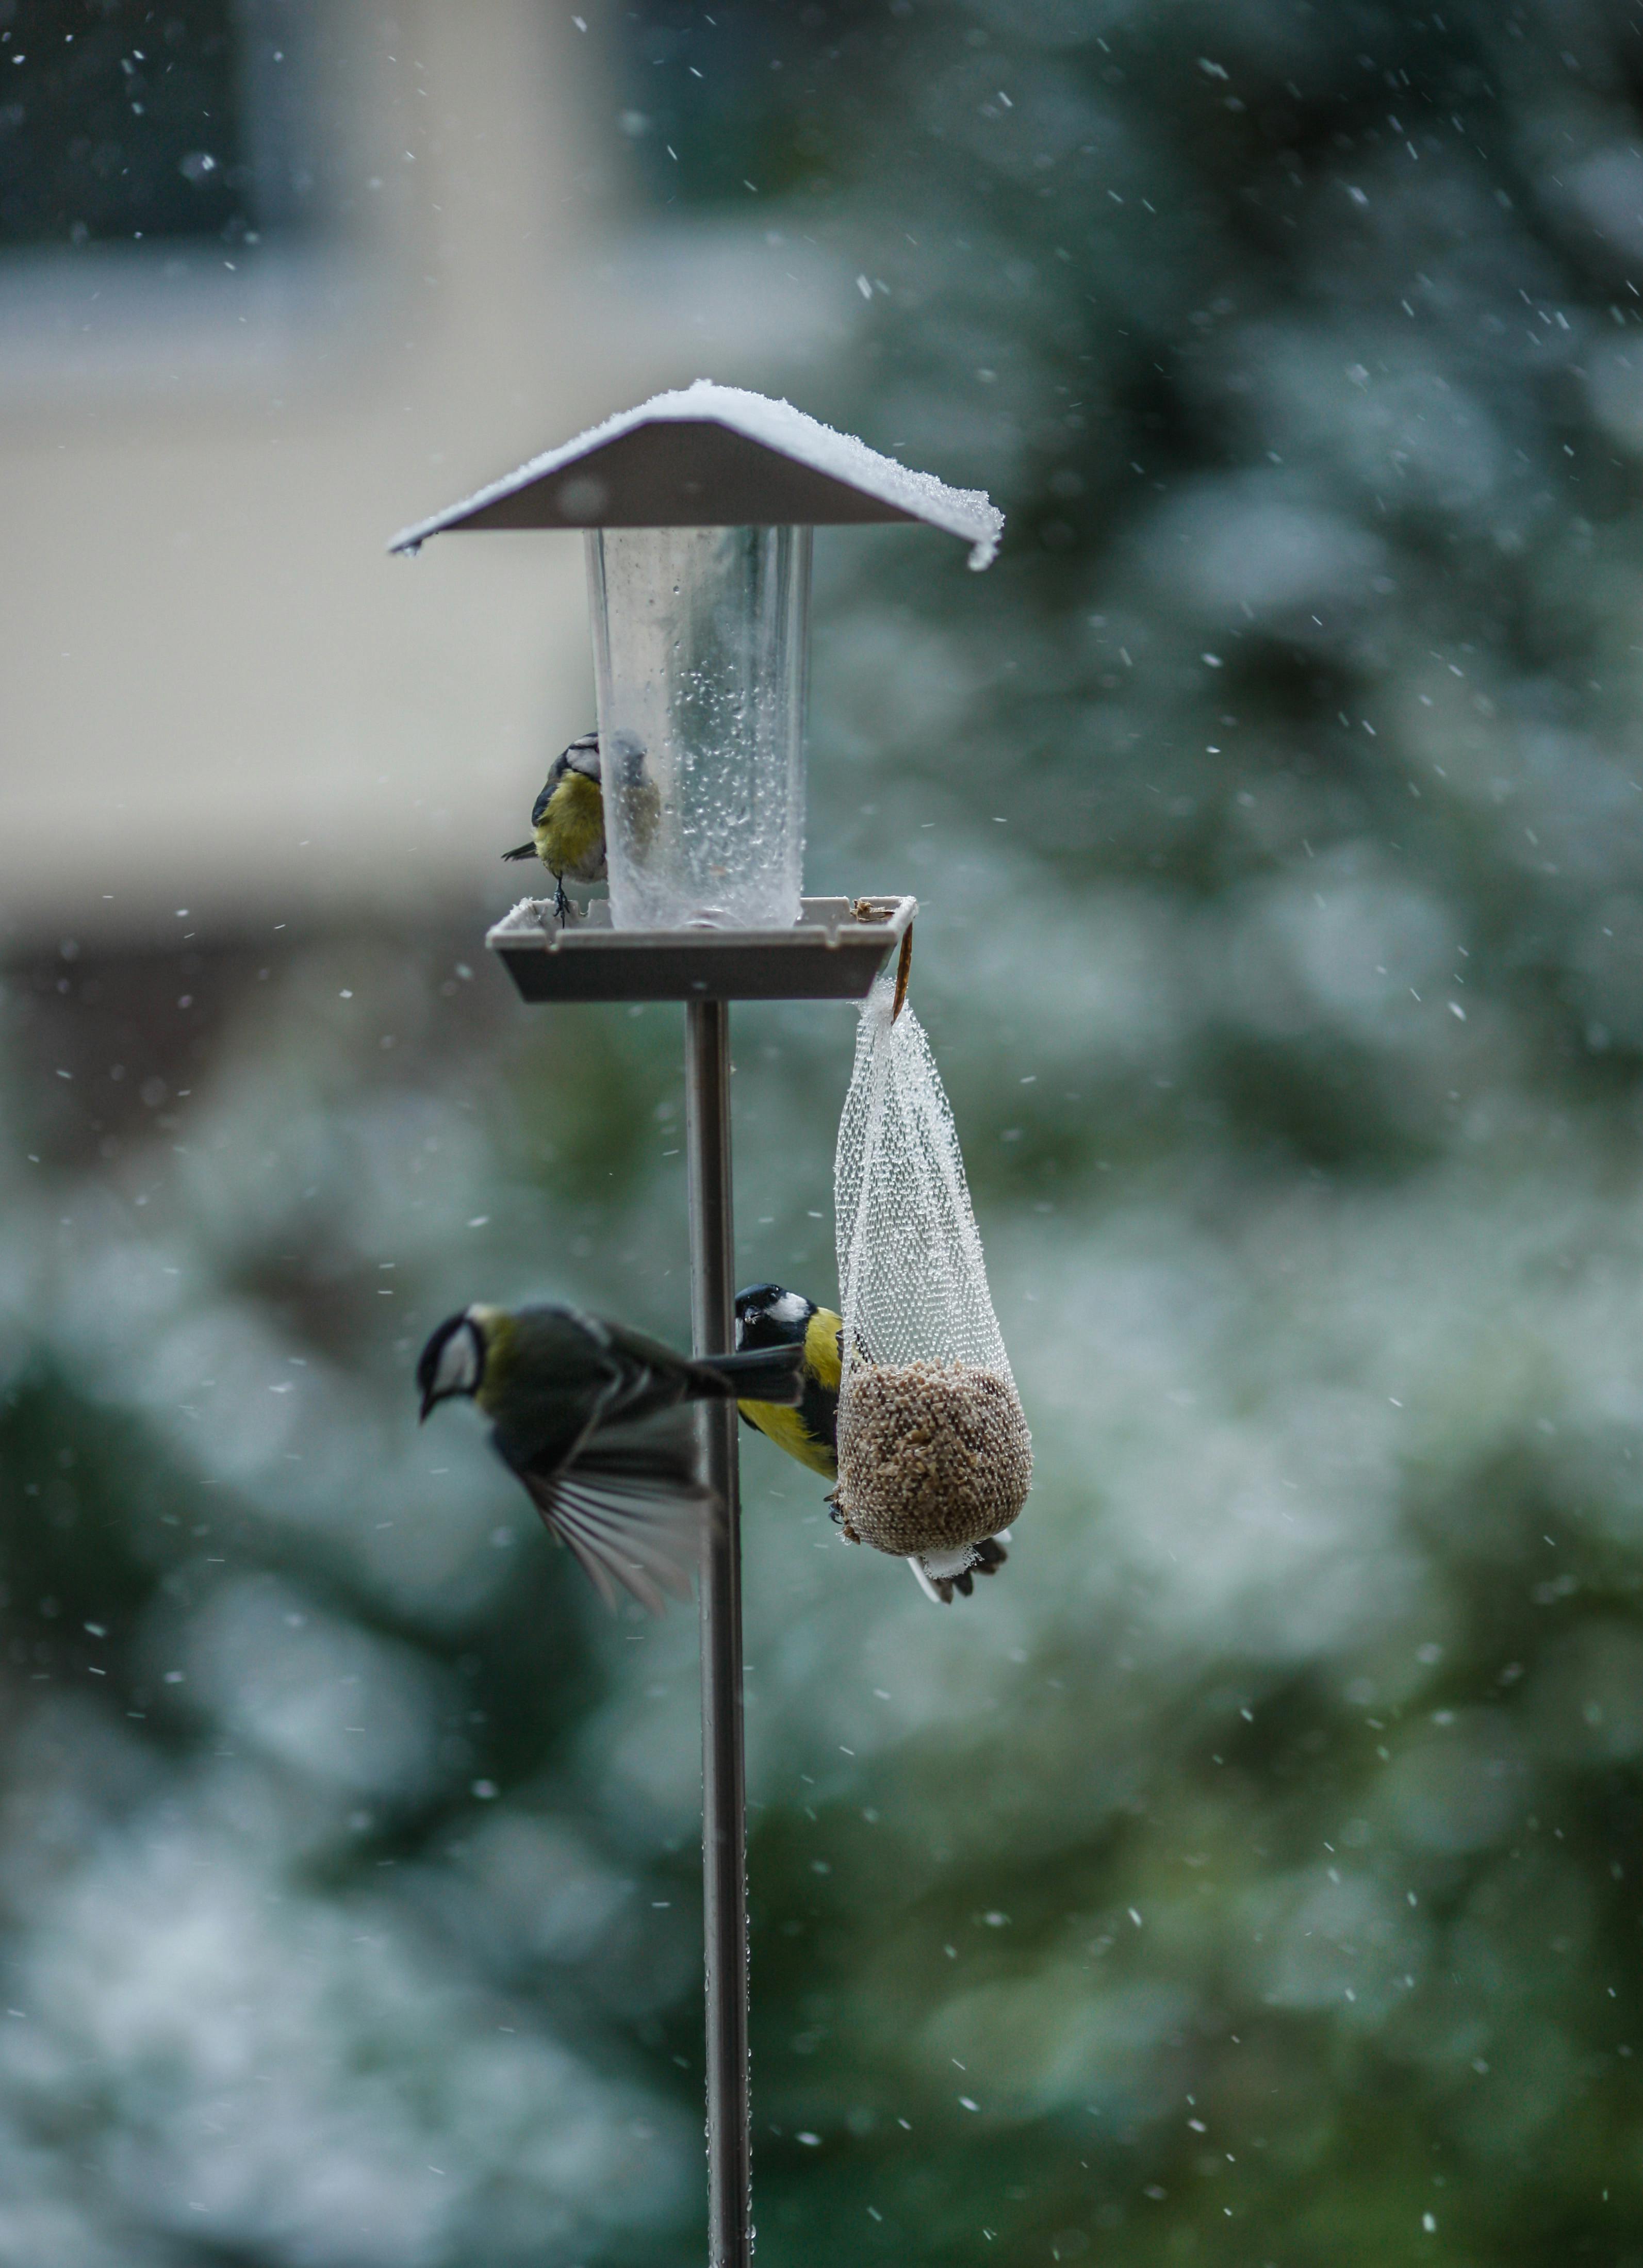 Emergency food sources for birds